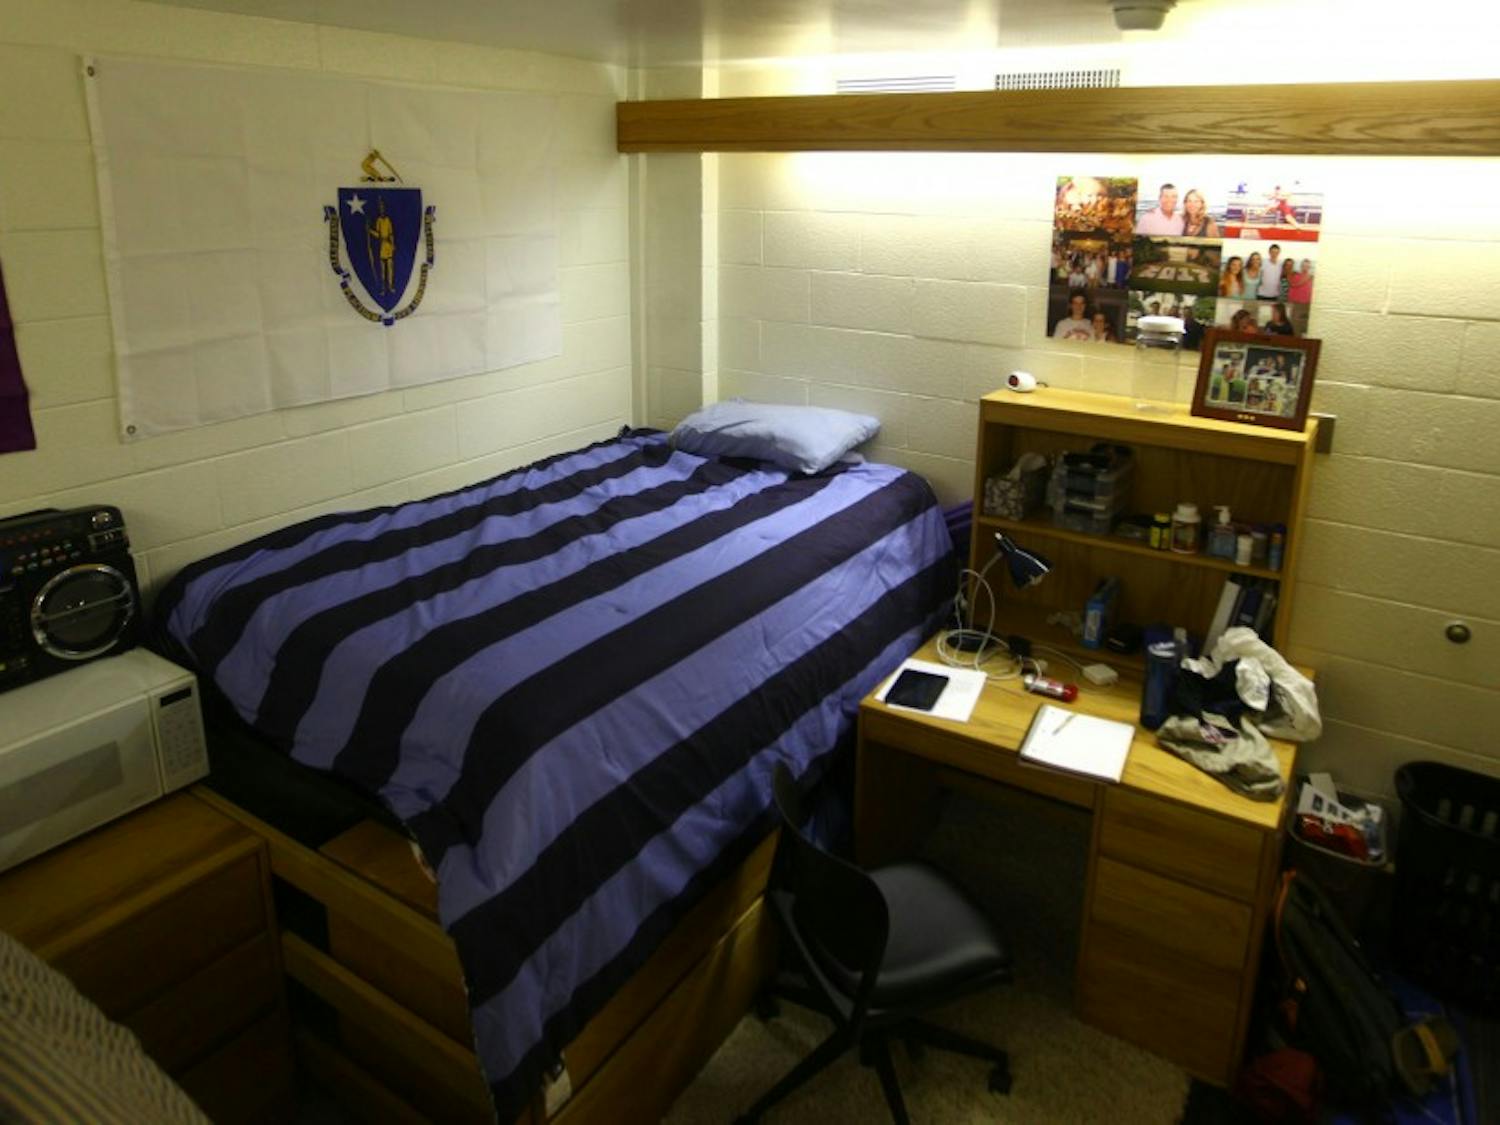 Beginning this May, the Housing, Dining and Residence Life staff will undertake a project to improve Edens dorms, like the one pictured above, and their sense of community.